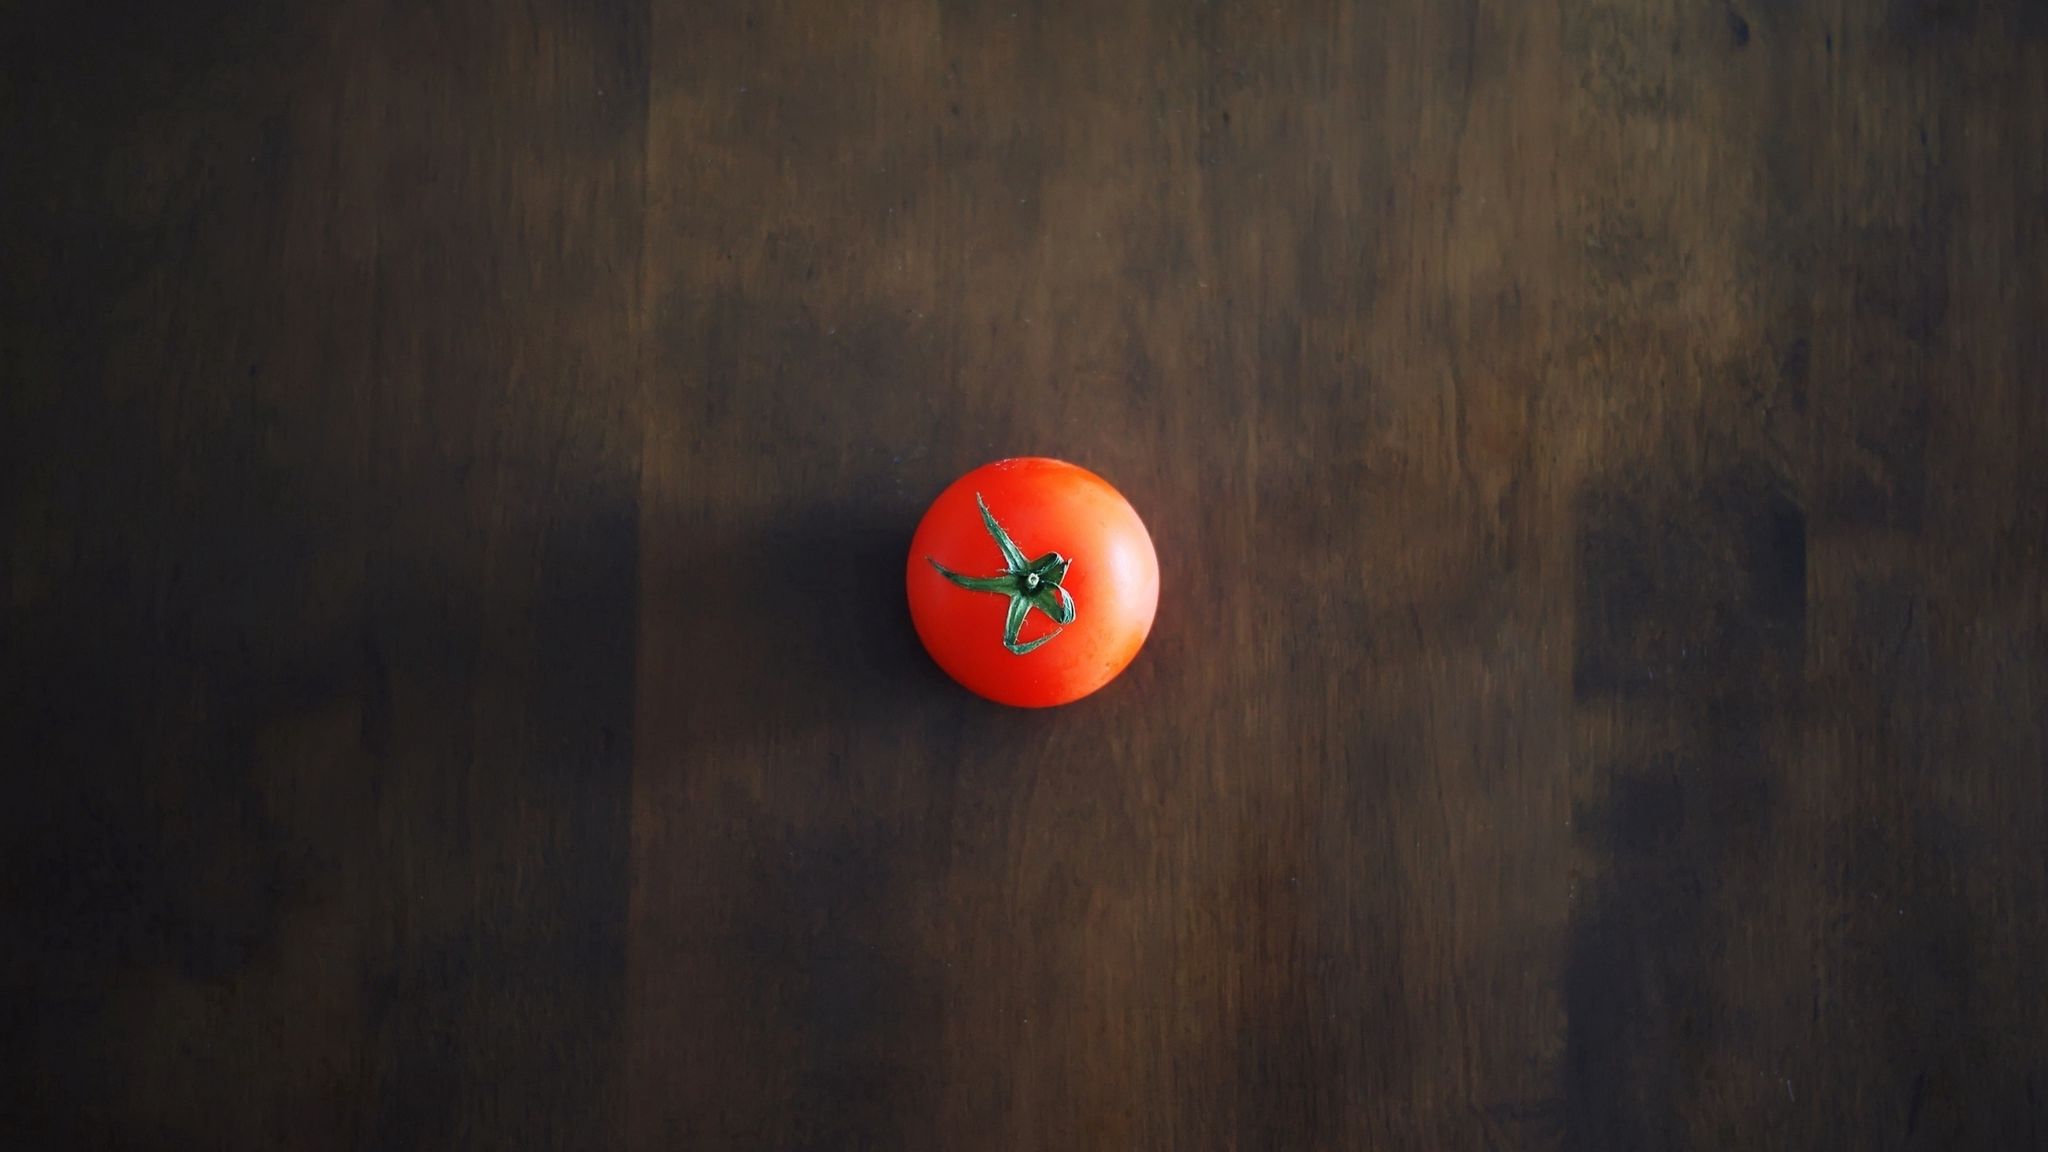 2048x1152 Wallpaper minimalism, tomato, red, table, wall, shadow, background